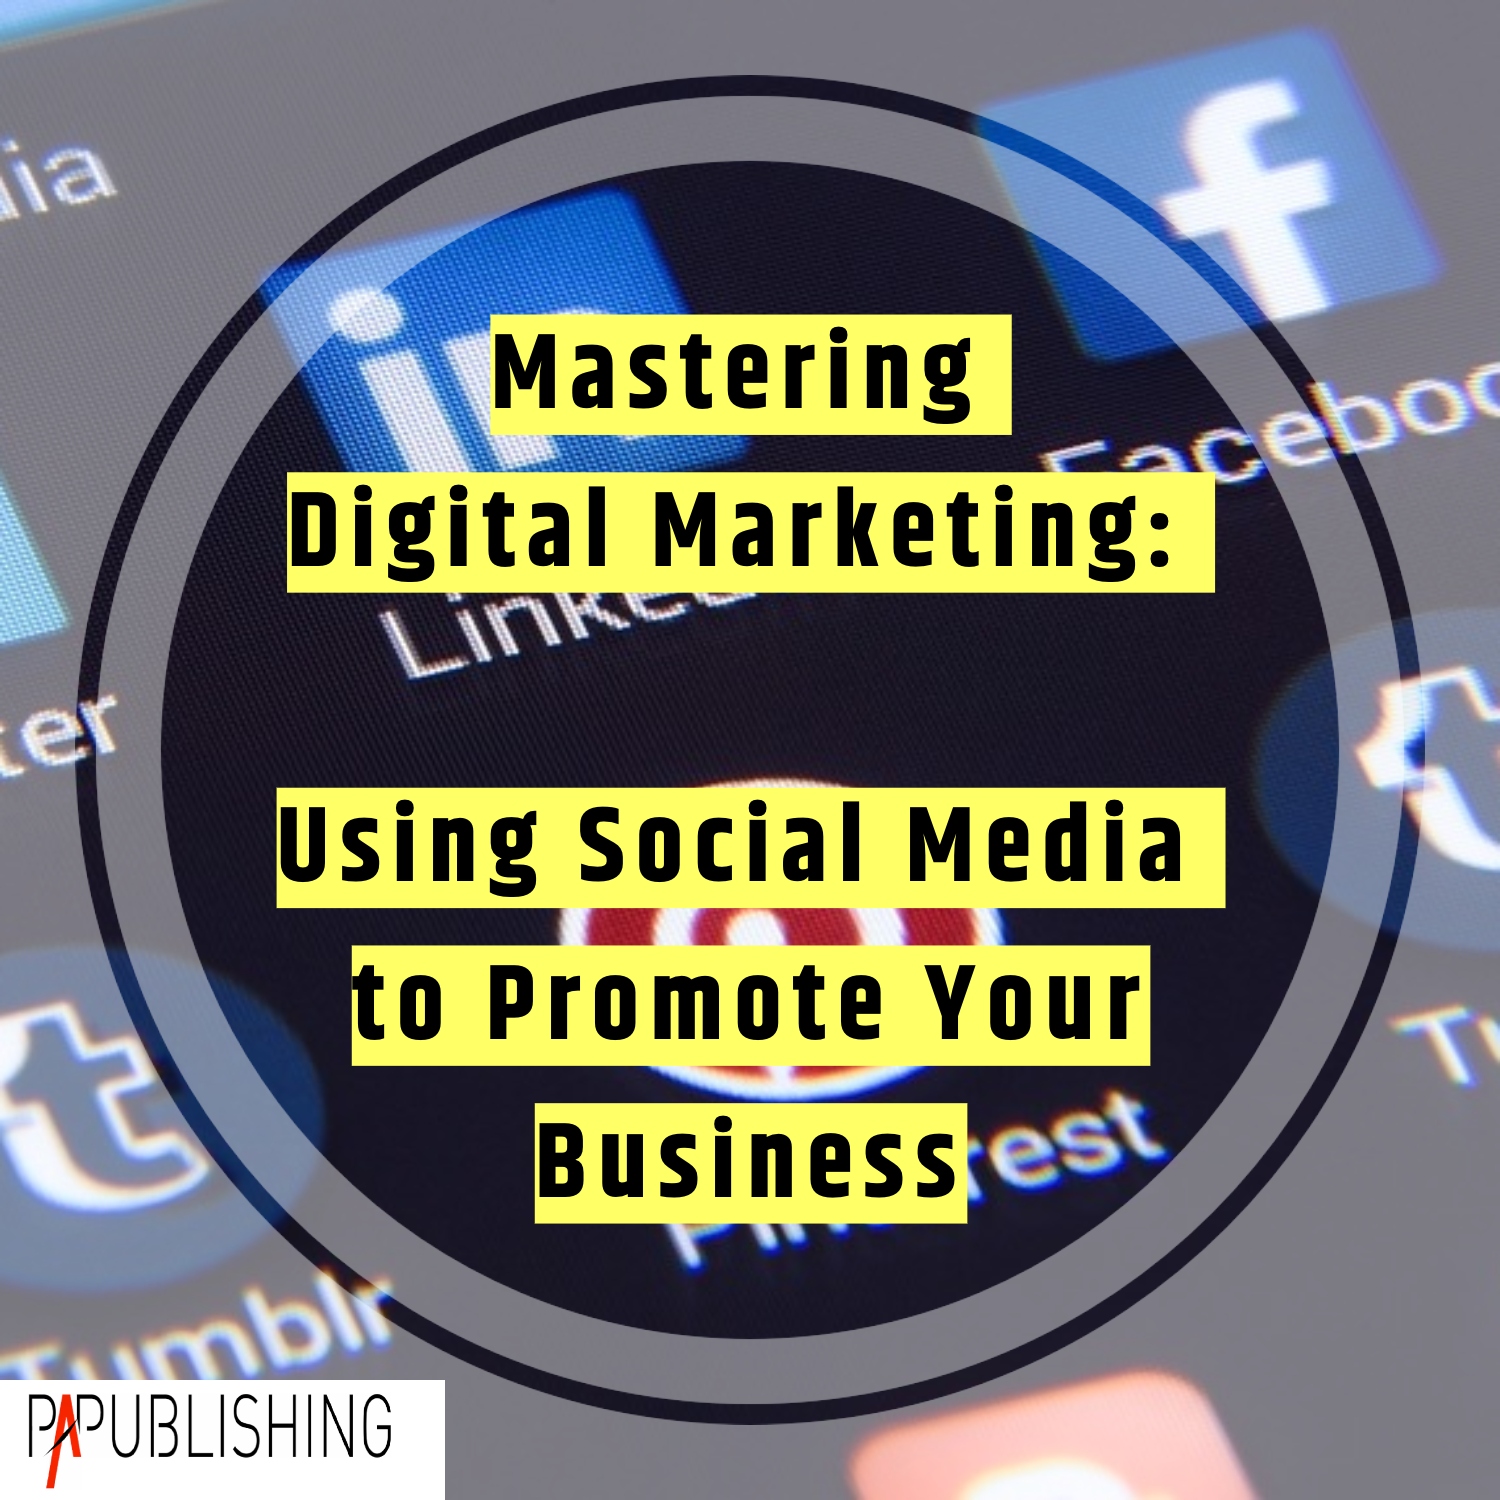 Mastering Digital Marketing: Using Social Media to Promote Your Business